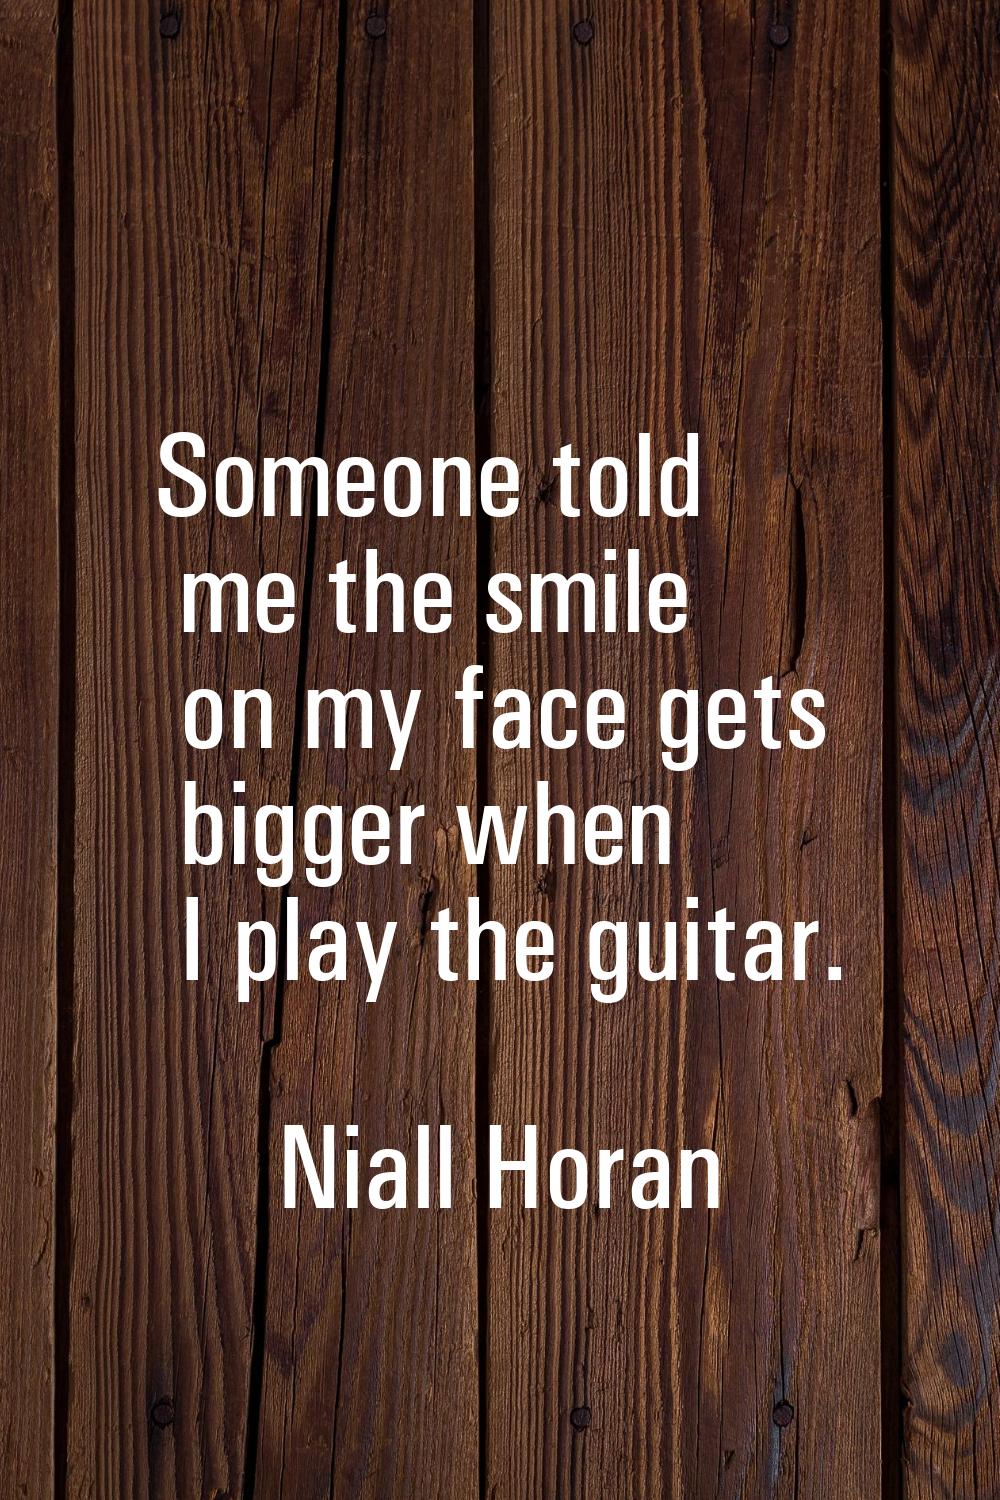 Someone told me the smile on my face gets bigger when I play the guitar.